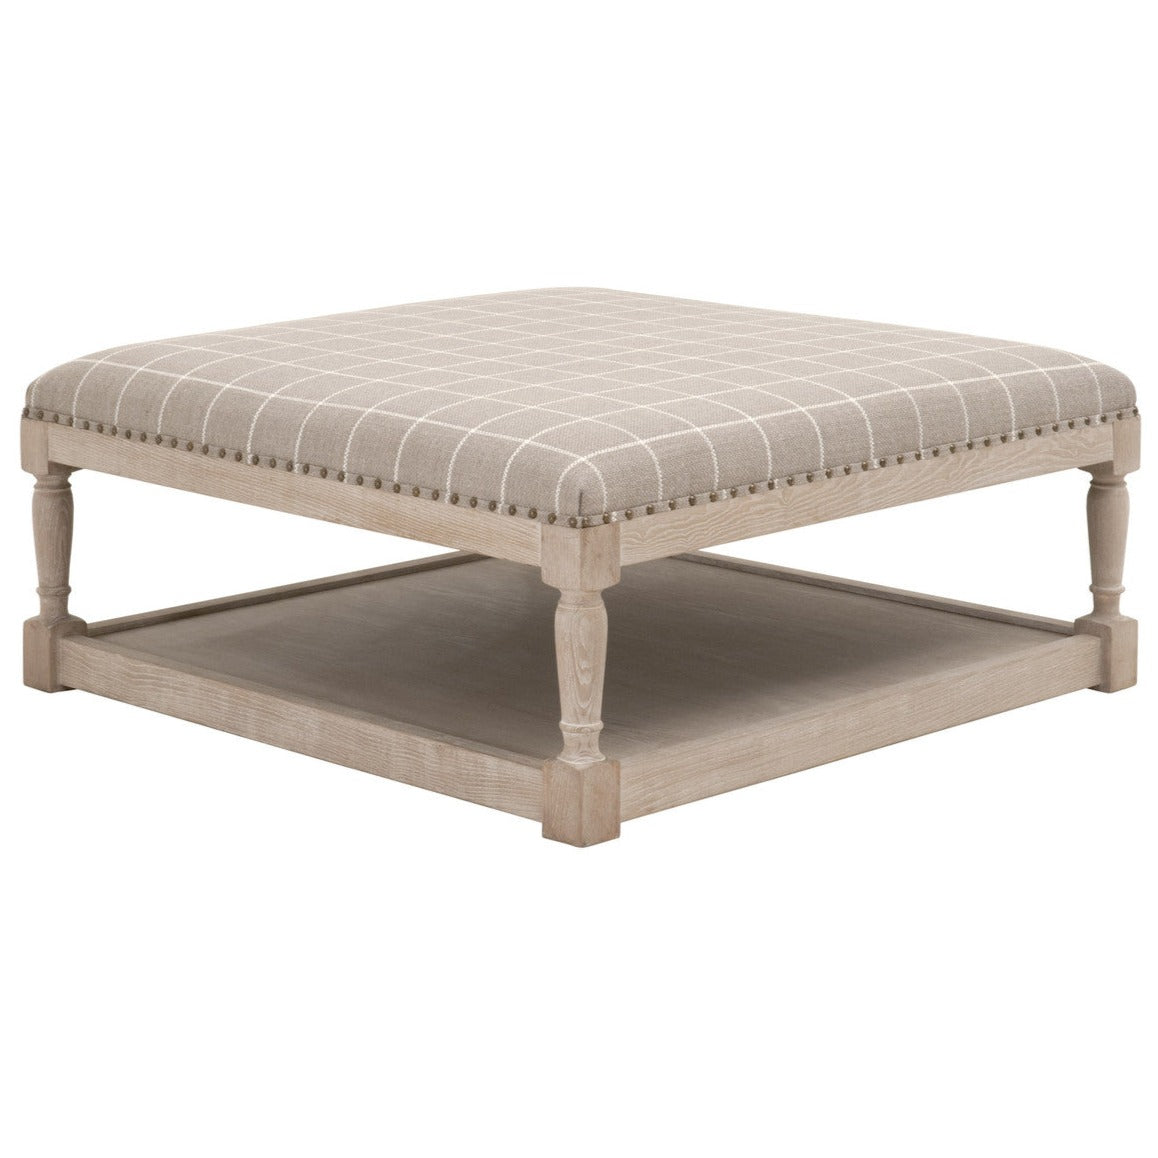 Townsend Upholstered Windowpane Pebble Coffee Table